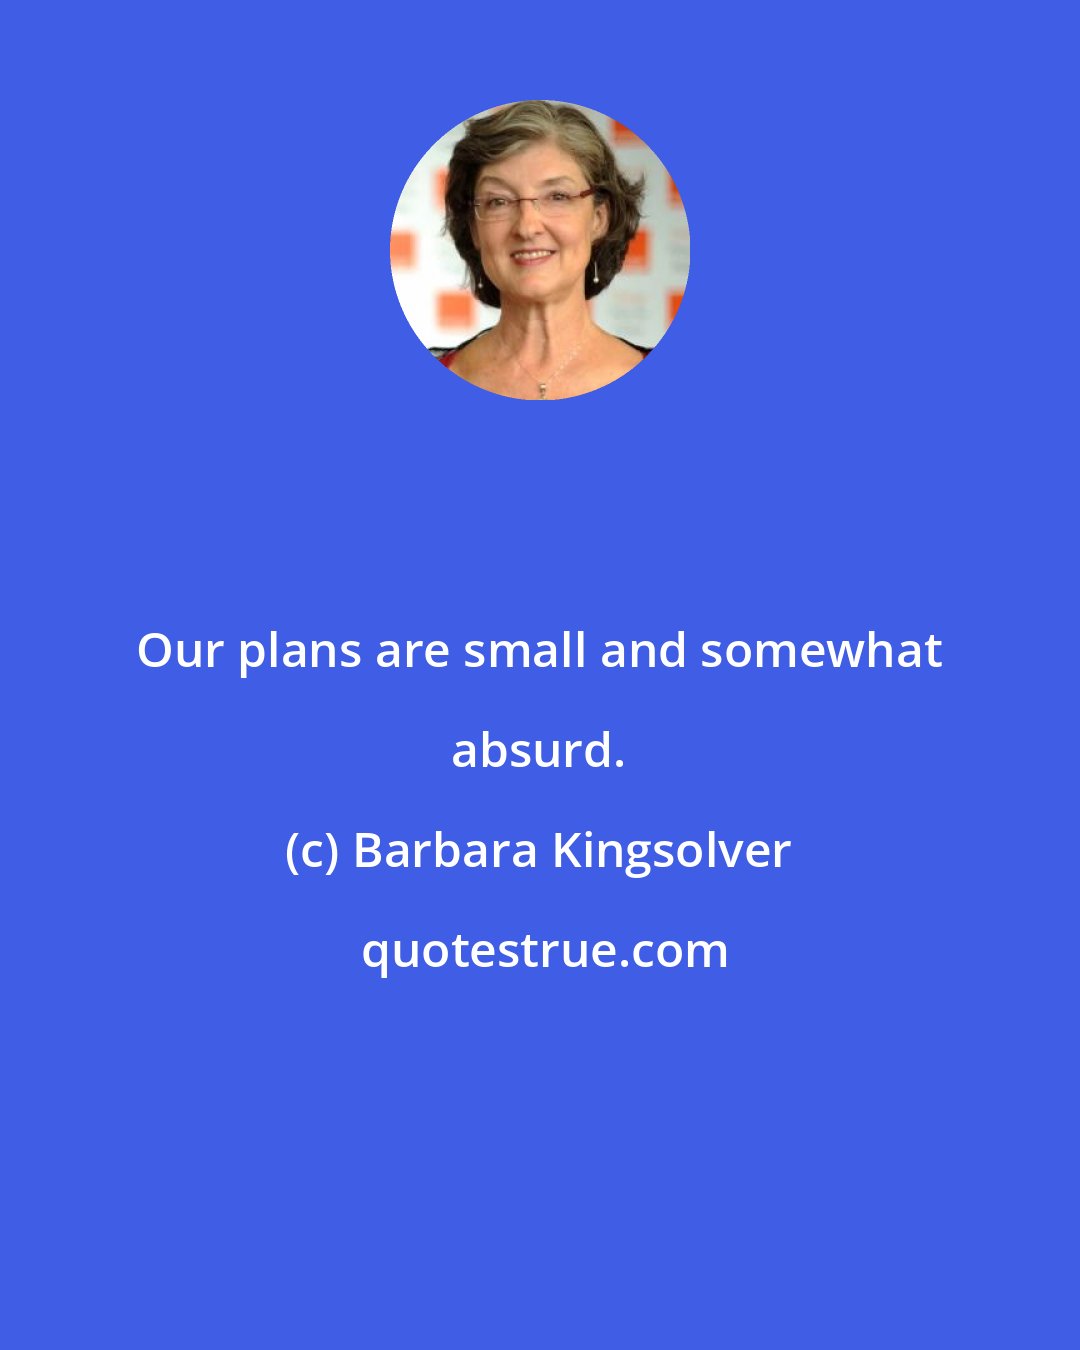 Barbara Kingsolver: Our plans are small and somewhat absurd.